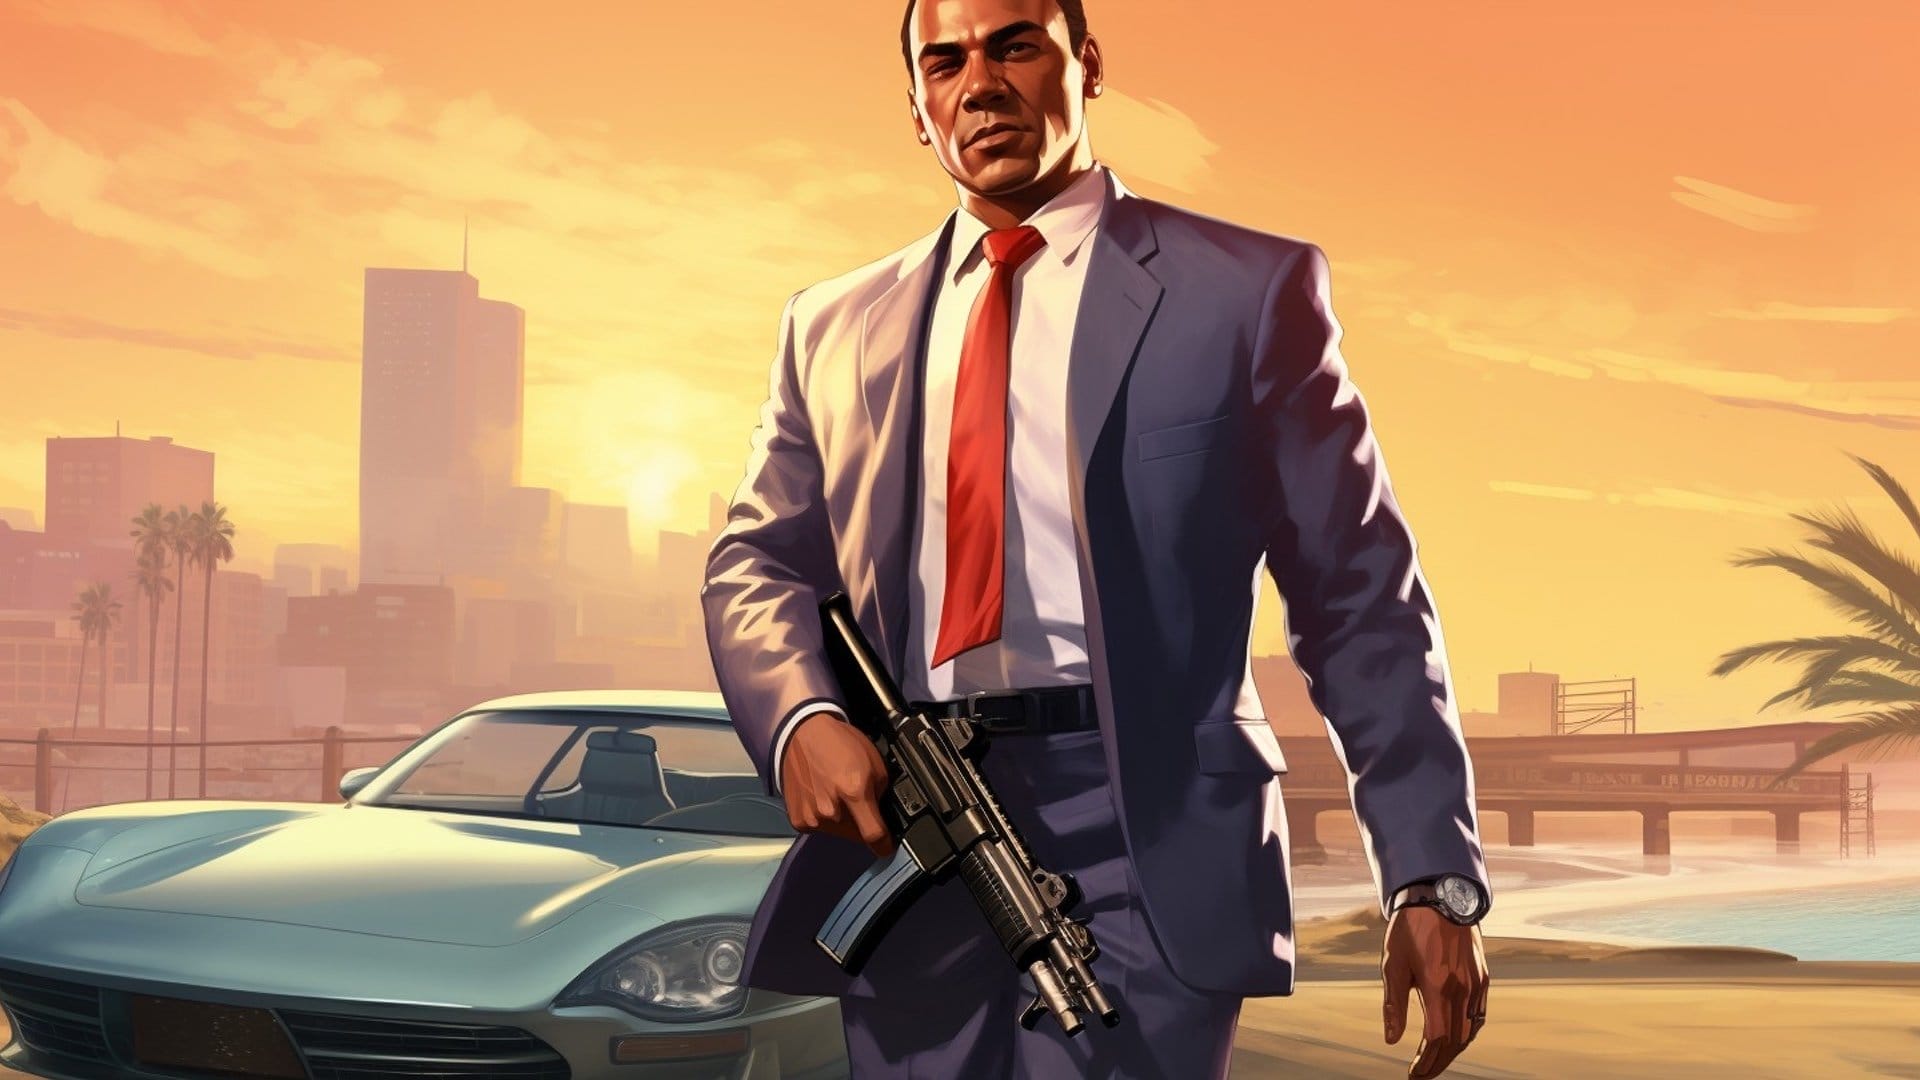 A known source of leaks has drawn a 'Grand Theft Auto 6' scene